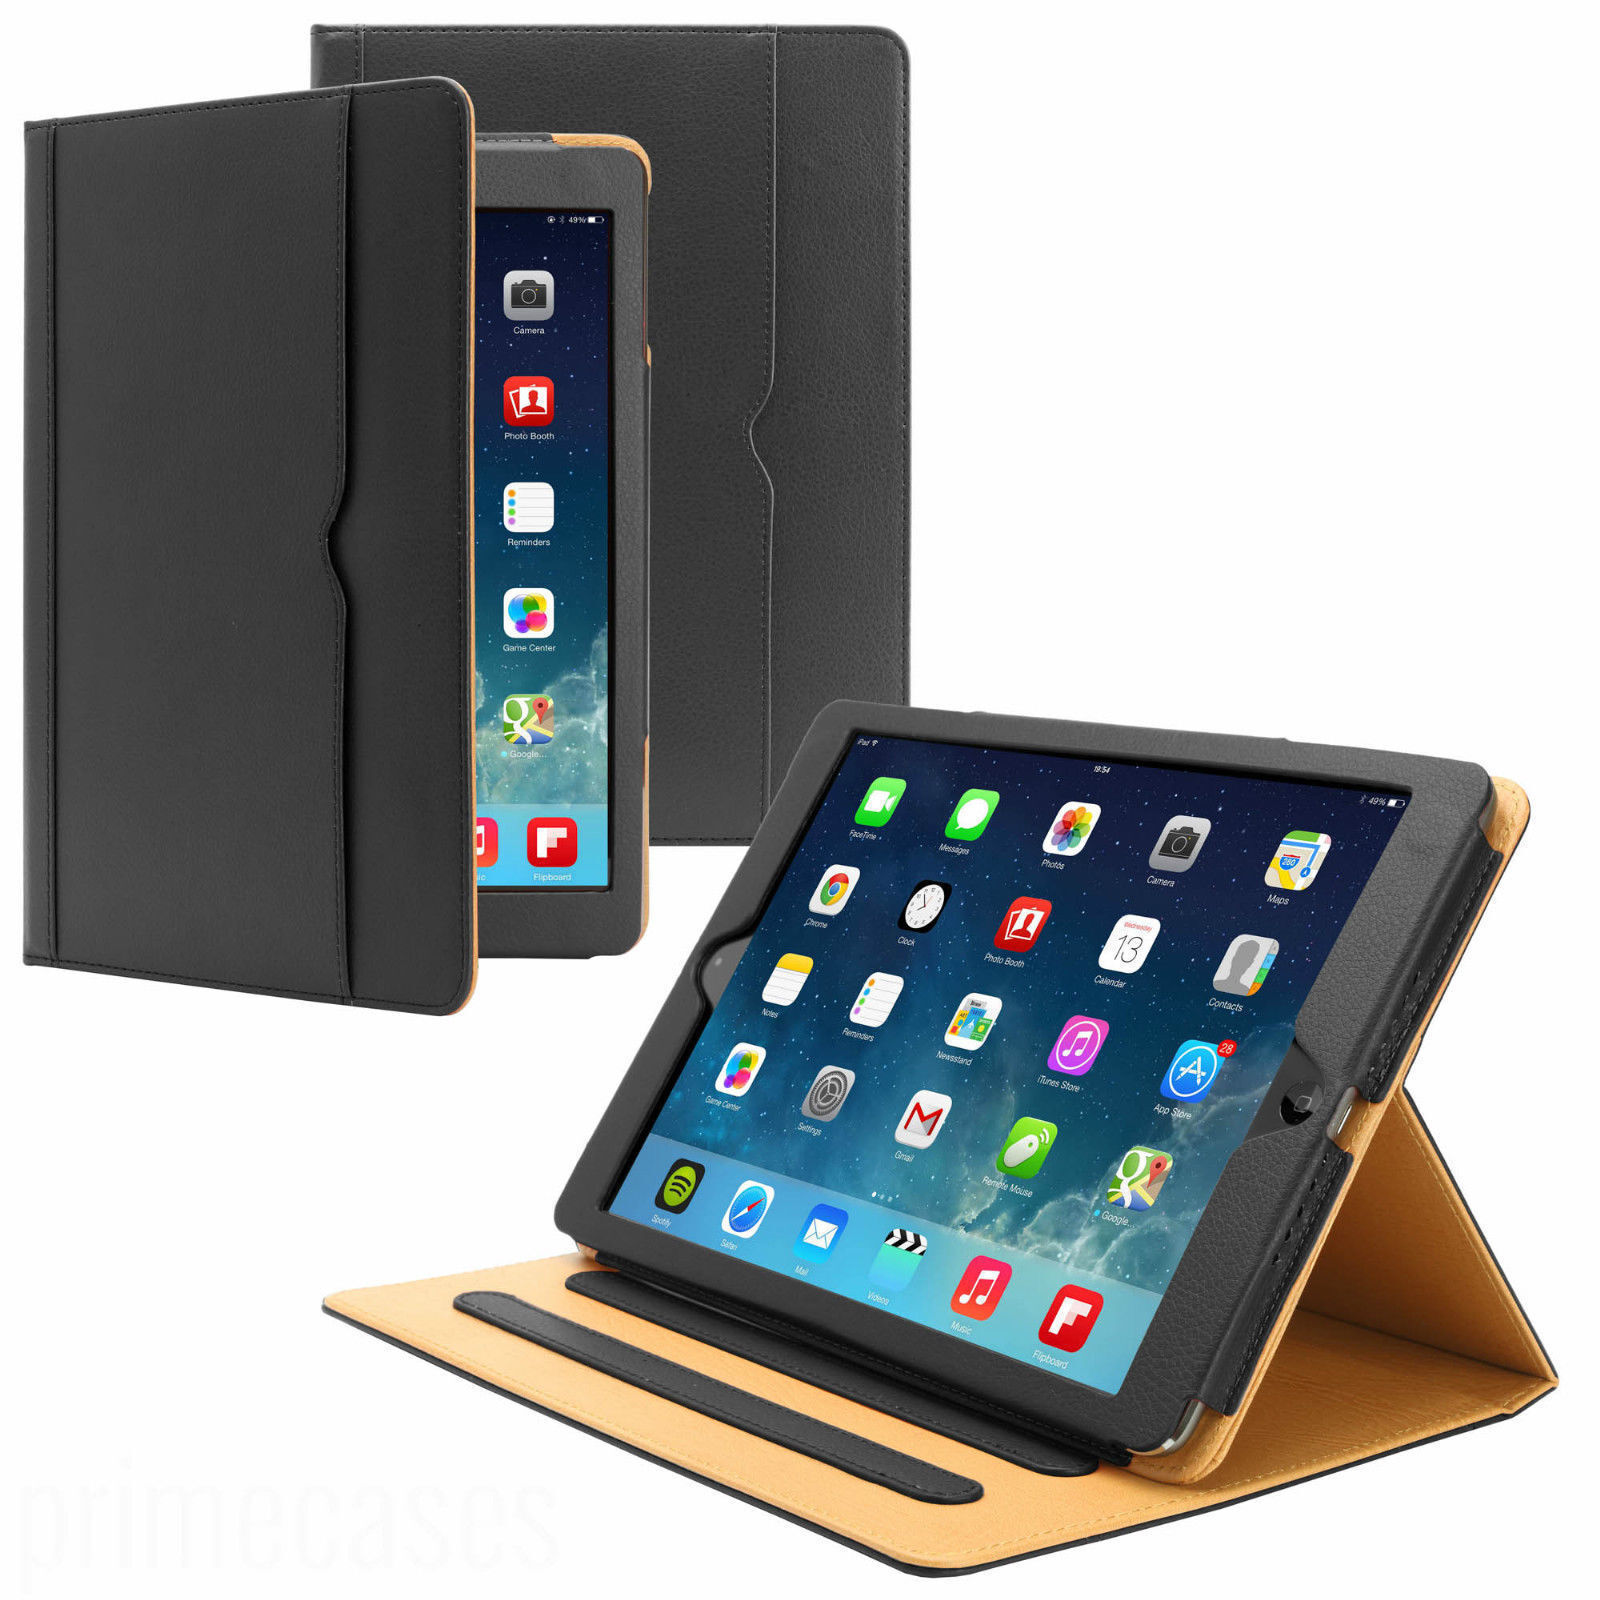 S-Tech iPad Case Soft Leather Smart Cover Sleep / Wake Folio Stand for APPLE